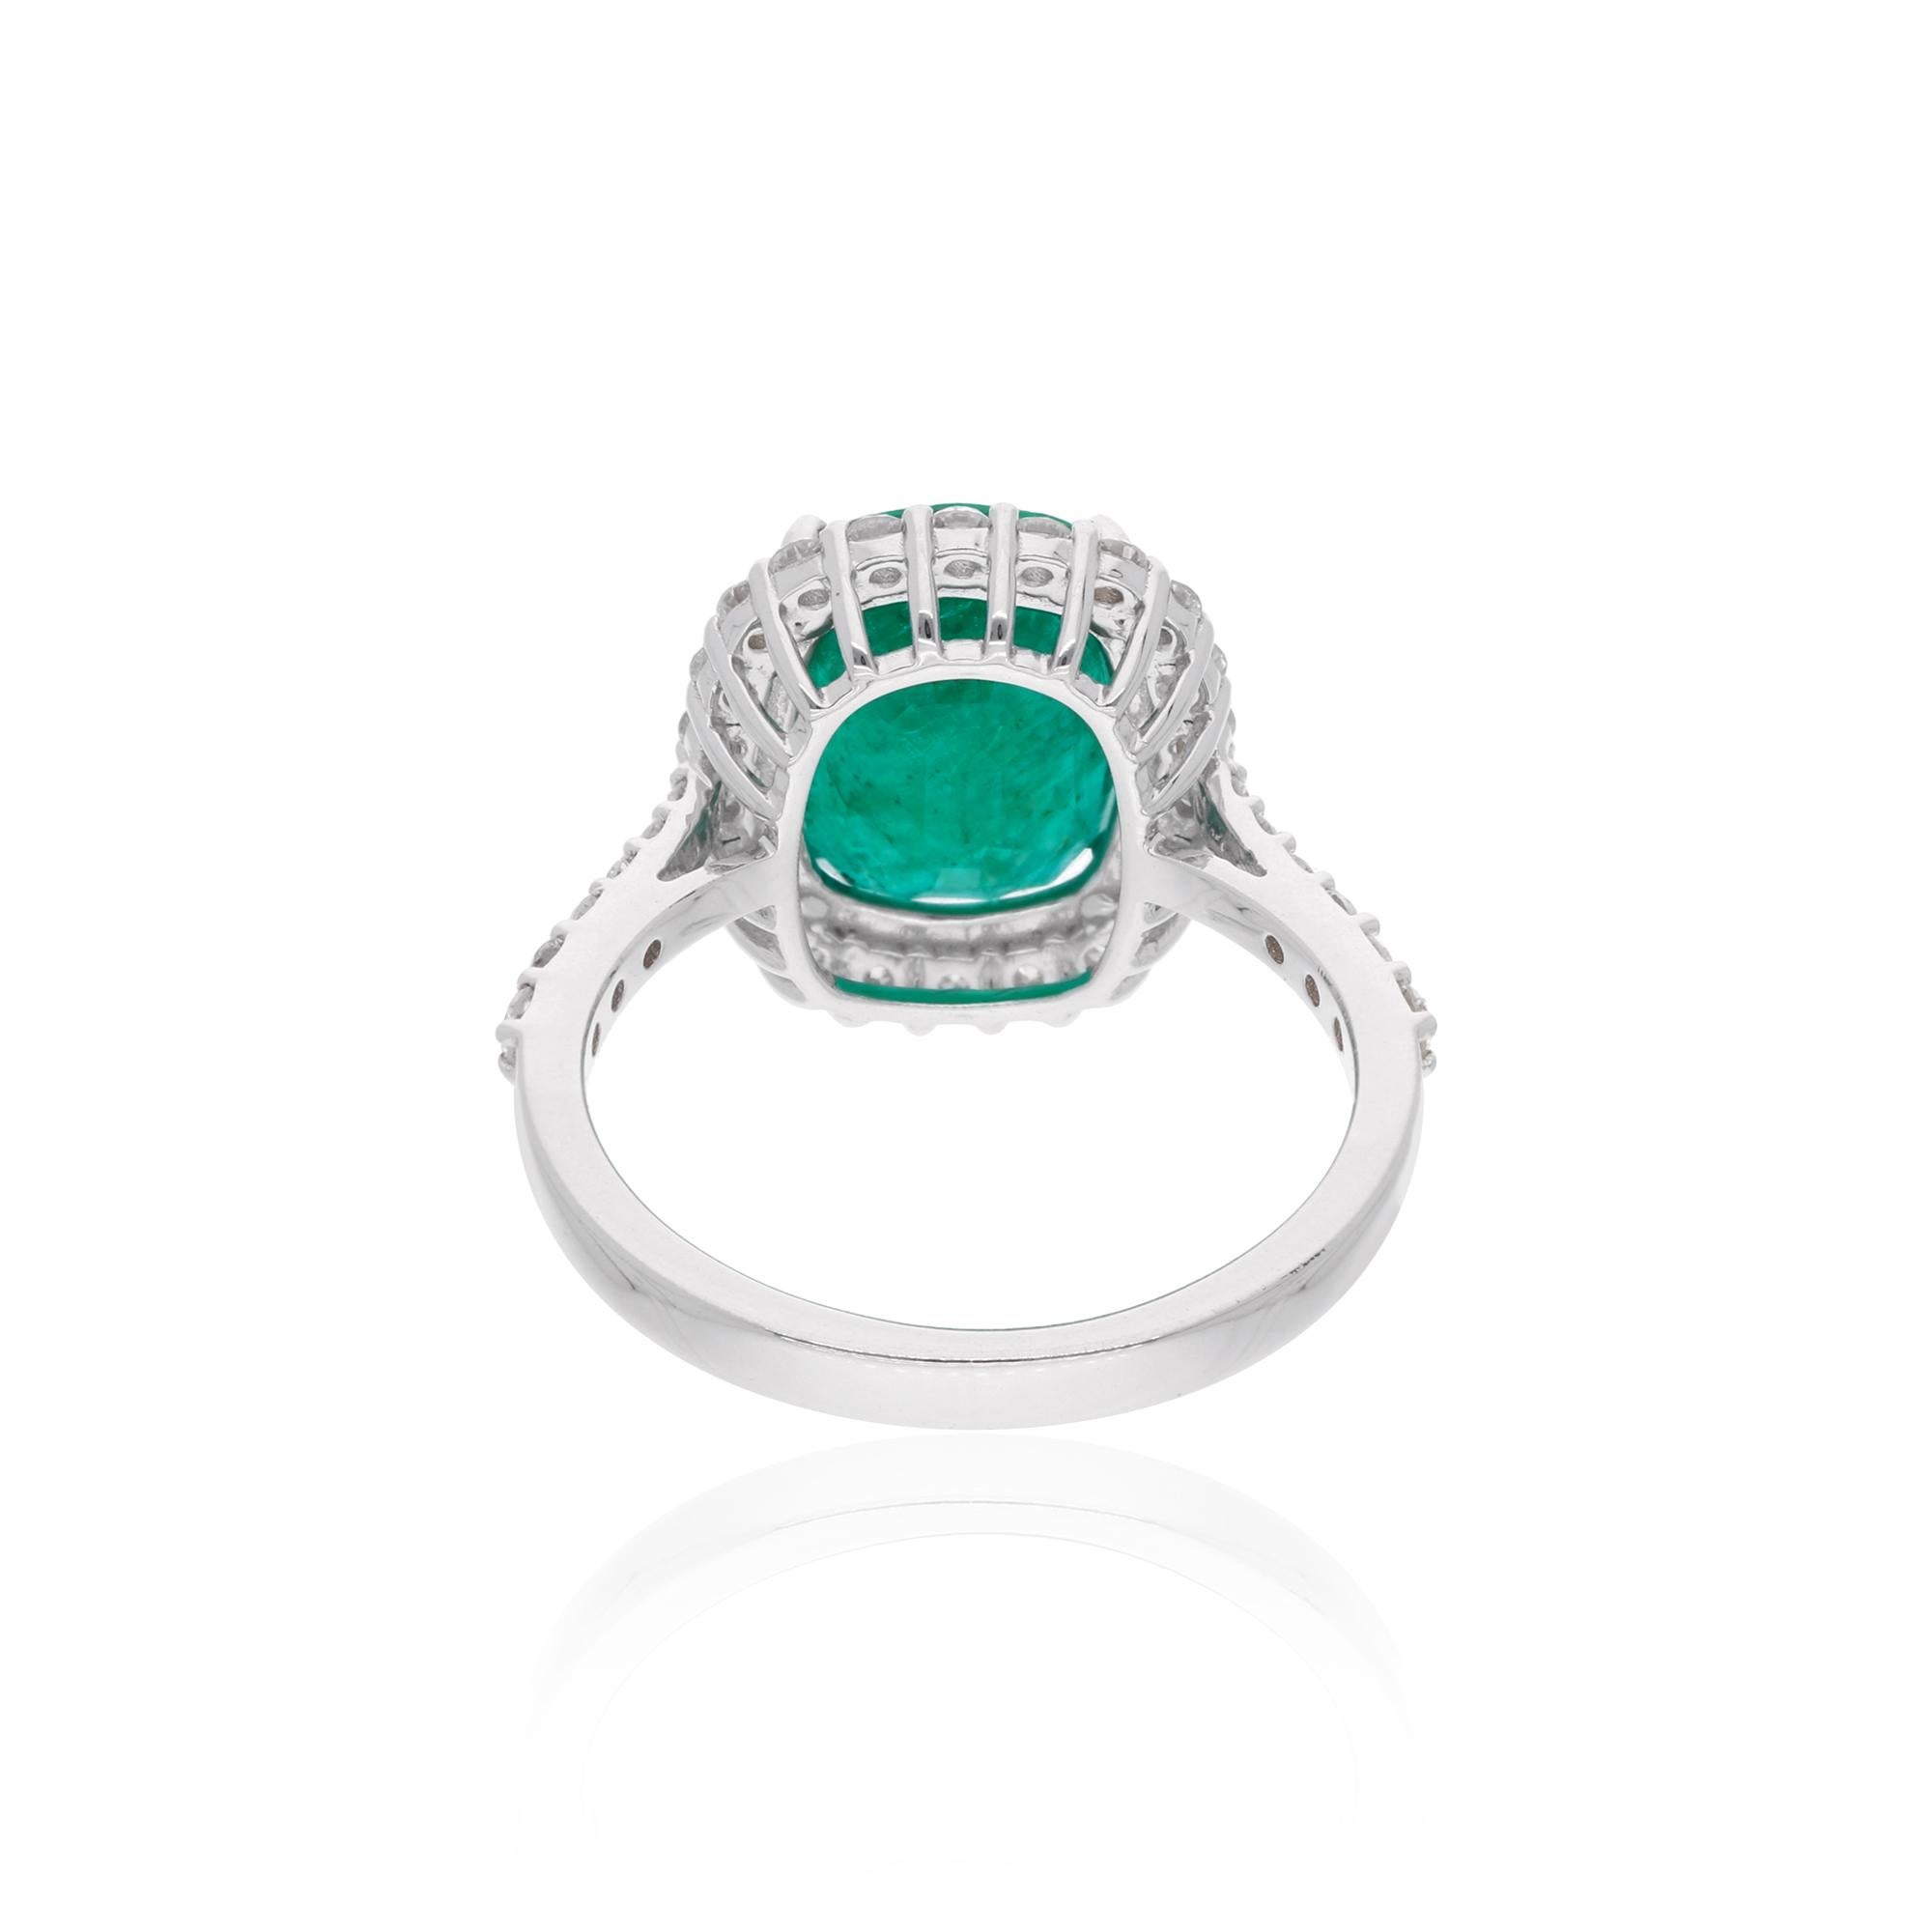 Item Code :- SER-23094
Gross Wt. :- 4.79 gm
18k White Gold Wt. :- 3.82 gm
Natural Diamond Wt. :- 0.62 Ct. ( AVERAGE DIAMOND CLARITY SI1-SI2 & COLOR H-I )
Emerald Wt. :- 4.25 Ct.
Ring Size :- 7 US & All size available

✦